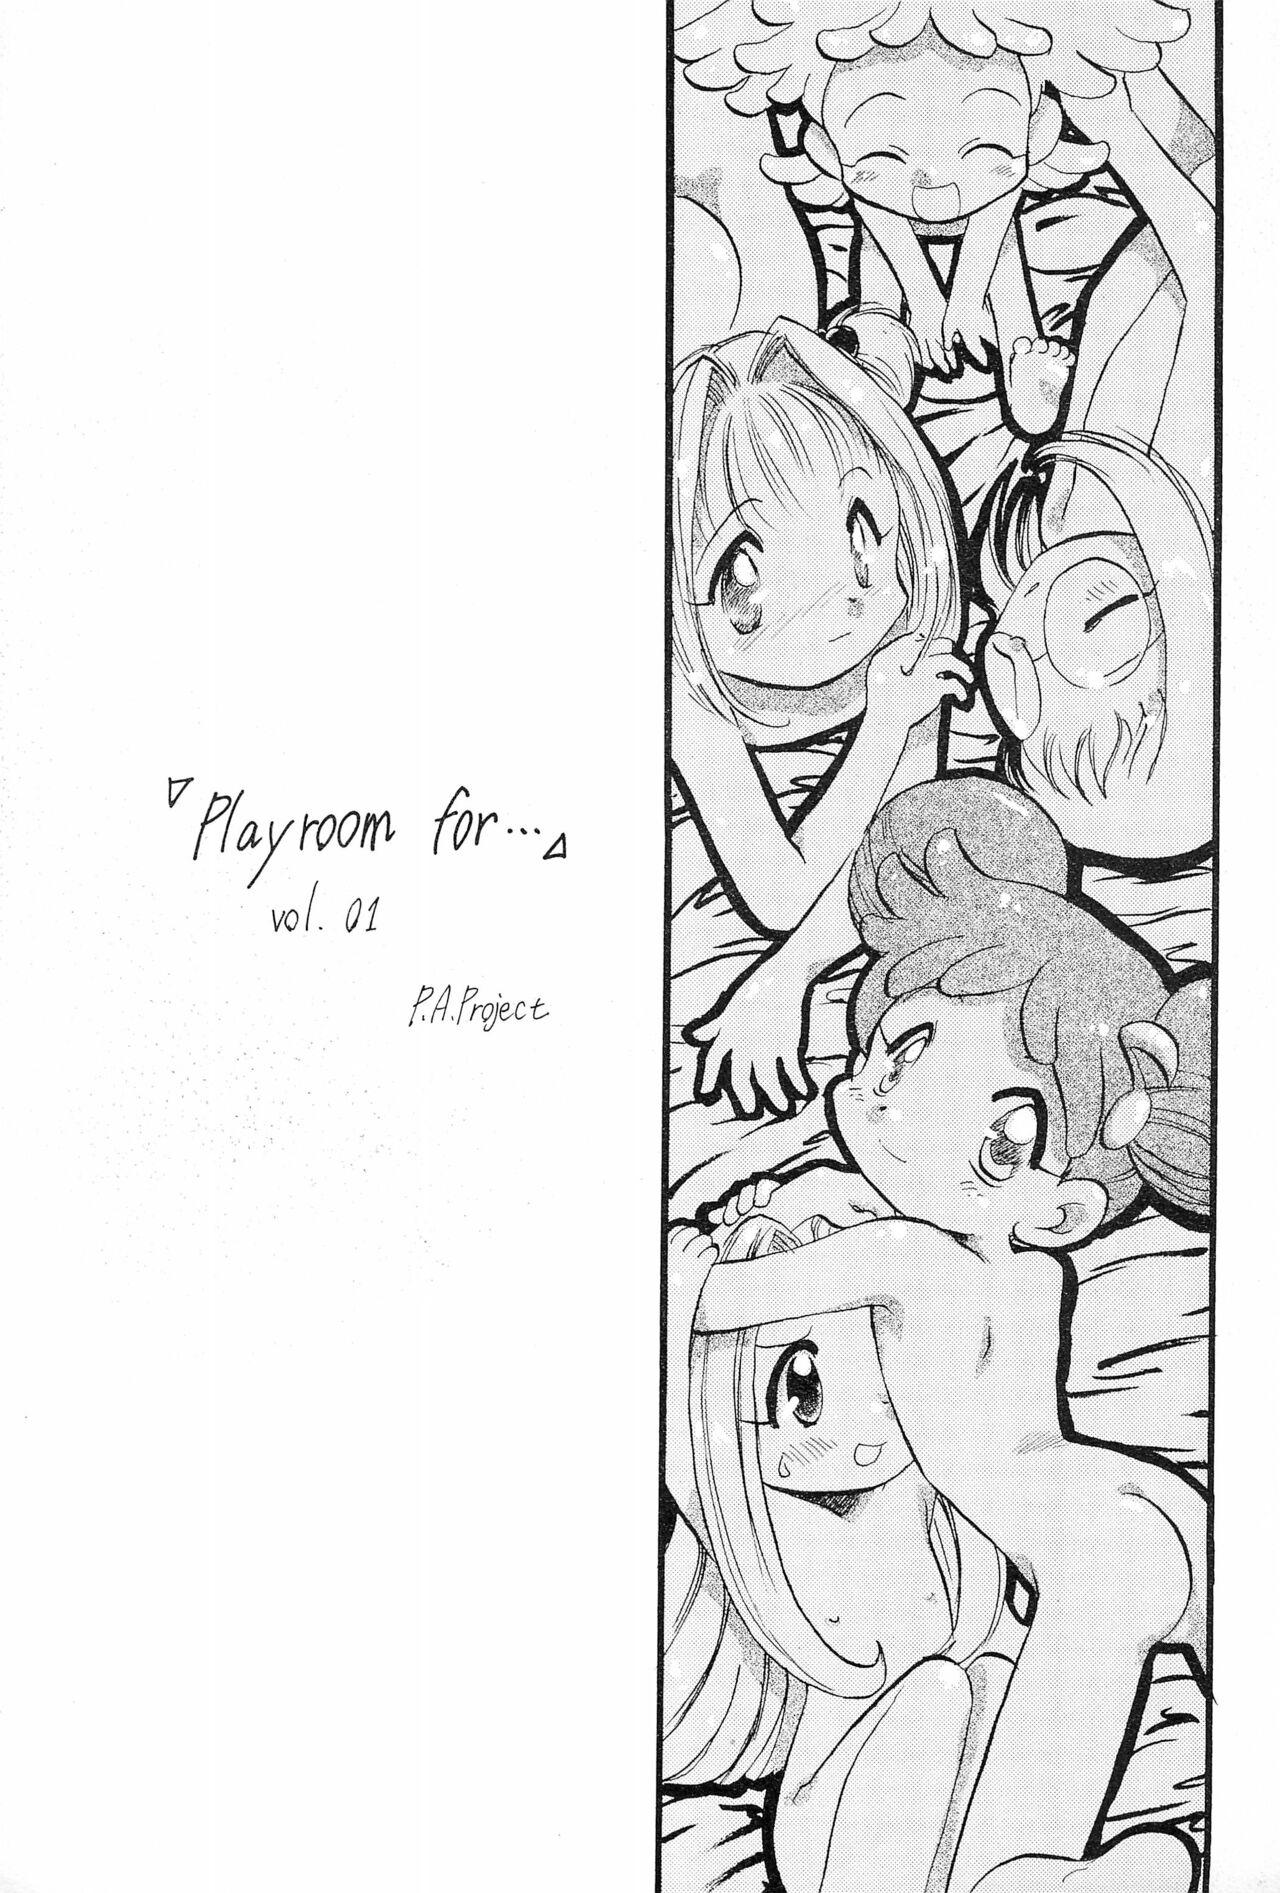 Pounded "Play room for..." Vol. 1 - 10 carat torte Ojamajo doremi | magical doremi Firsttime - Page 1